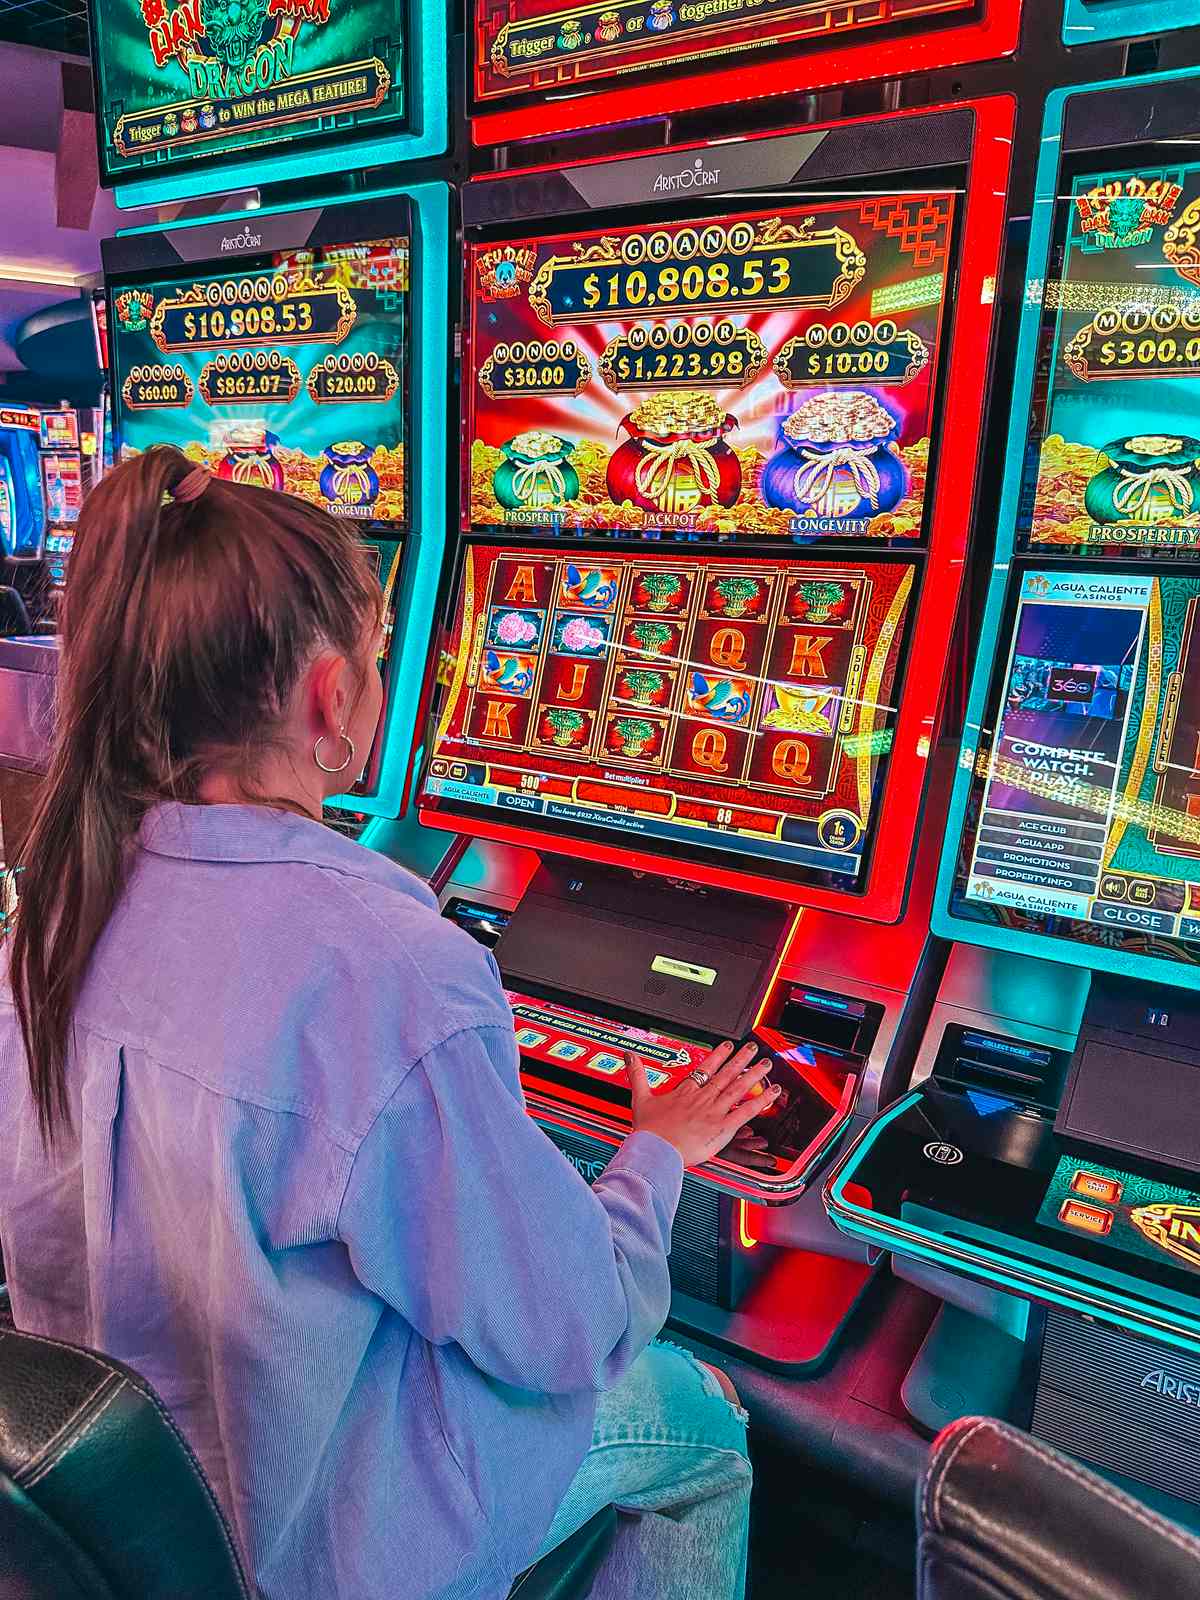 Slots at the casinos in Palm Springs California